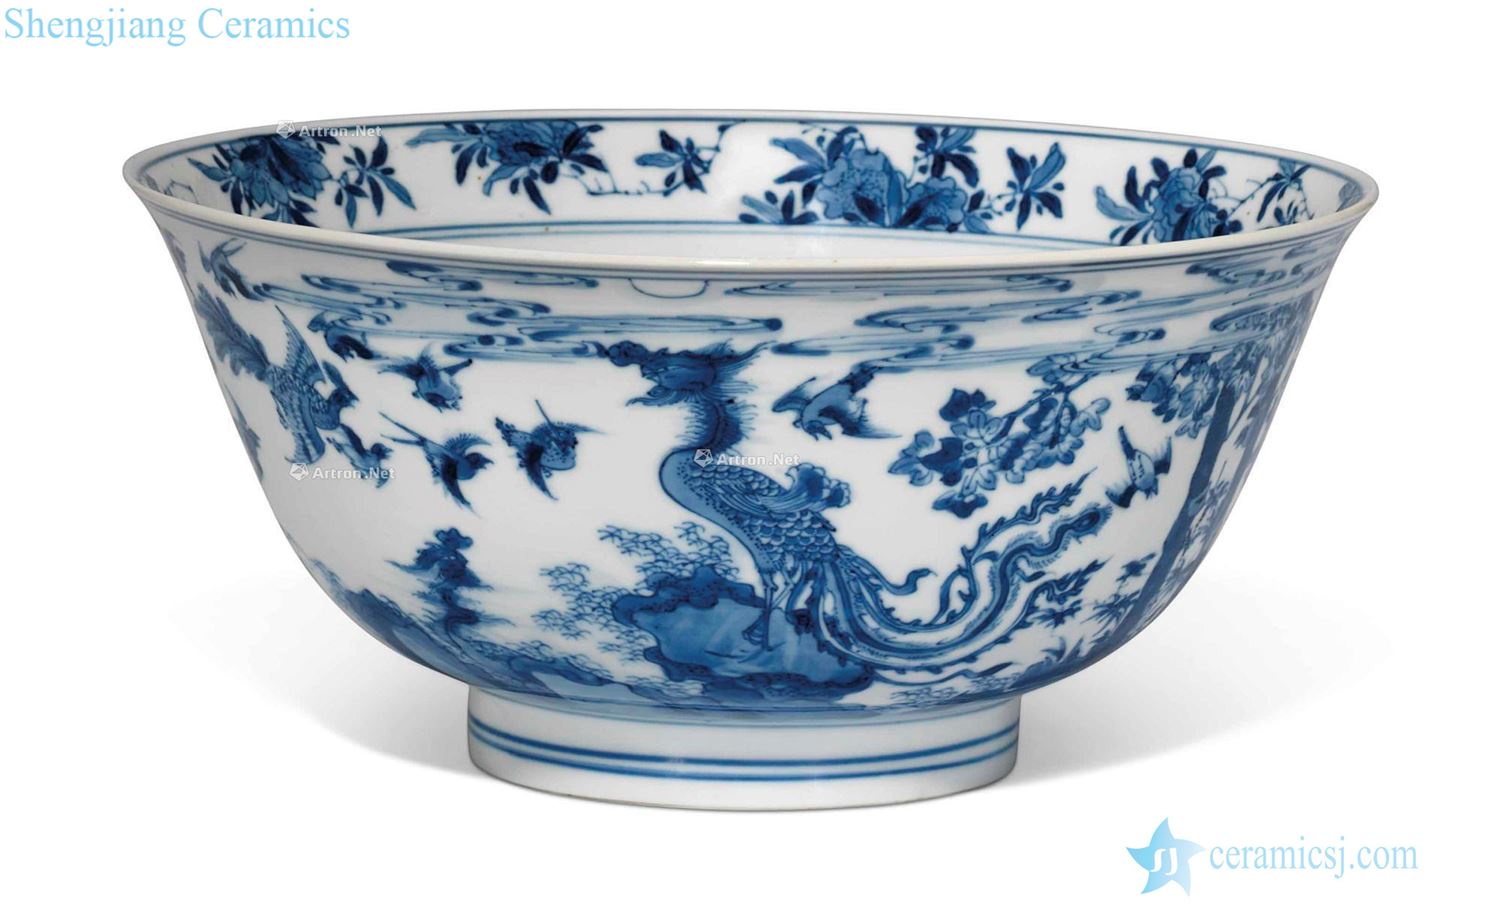 The qing emperor kangxi Figure bowl of blue and white birds pay homage to the king